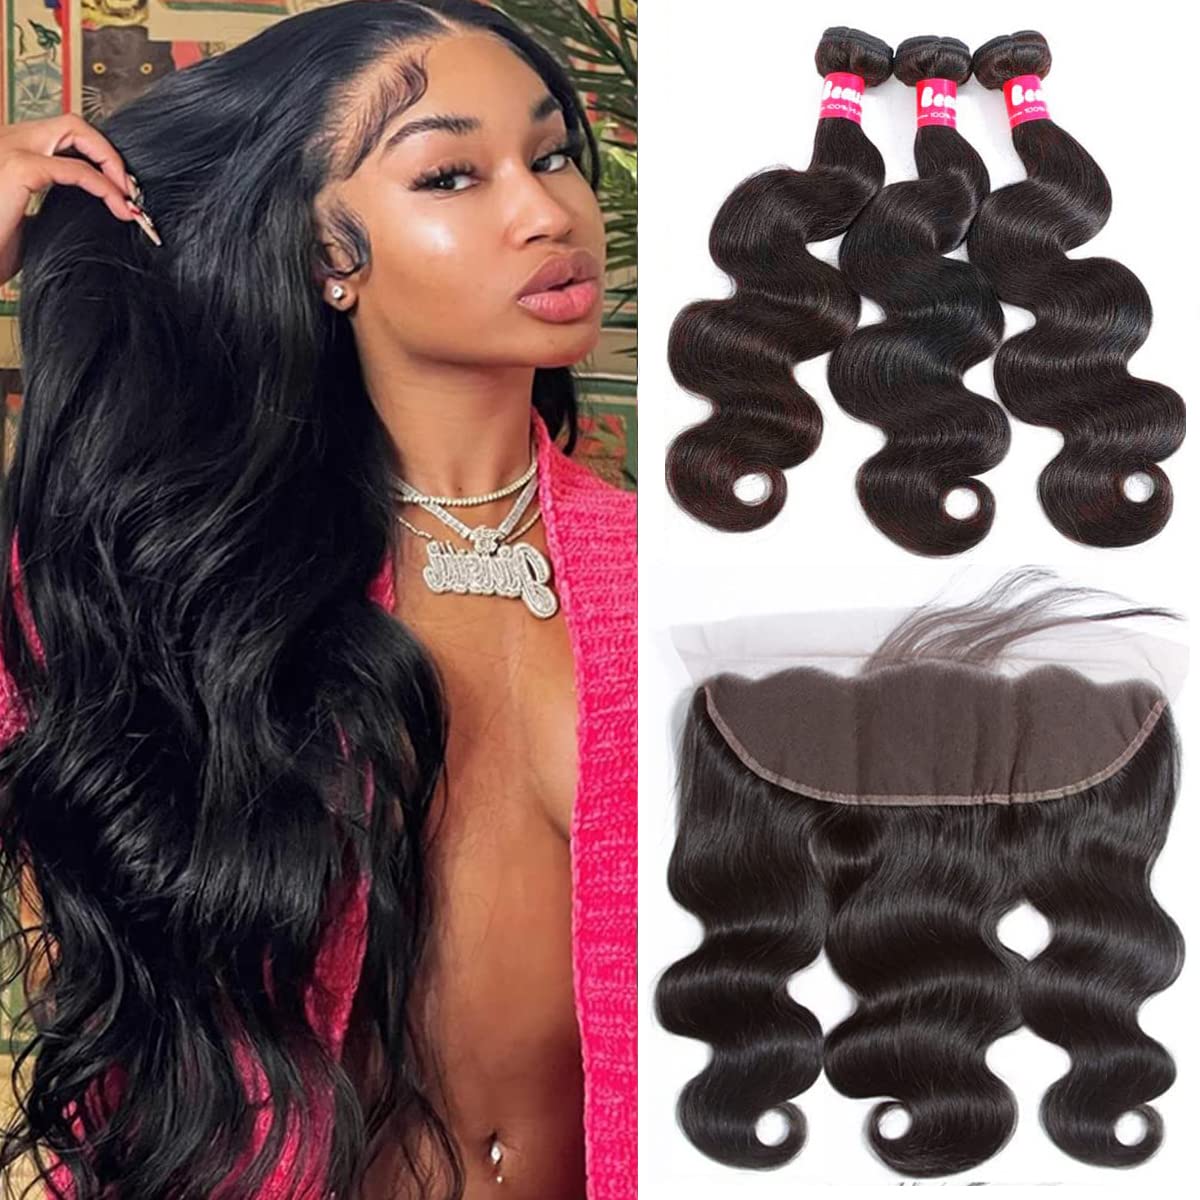 Relena Body Wave Bundles with Frontal Human Hair (26 28 30+18,Free Part)  13x4 Ear to Ear Lace Frontal Closure with 3 Bundles 100% Unprocessed Brazilian  Virgin Human Hair Weave Bundles with Frontal 26 28 30+18 body wave bun…